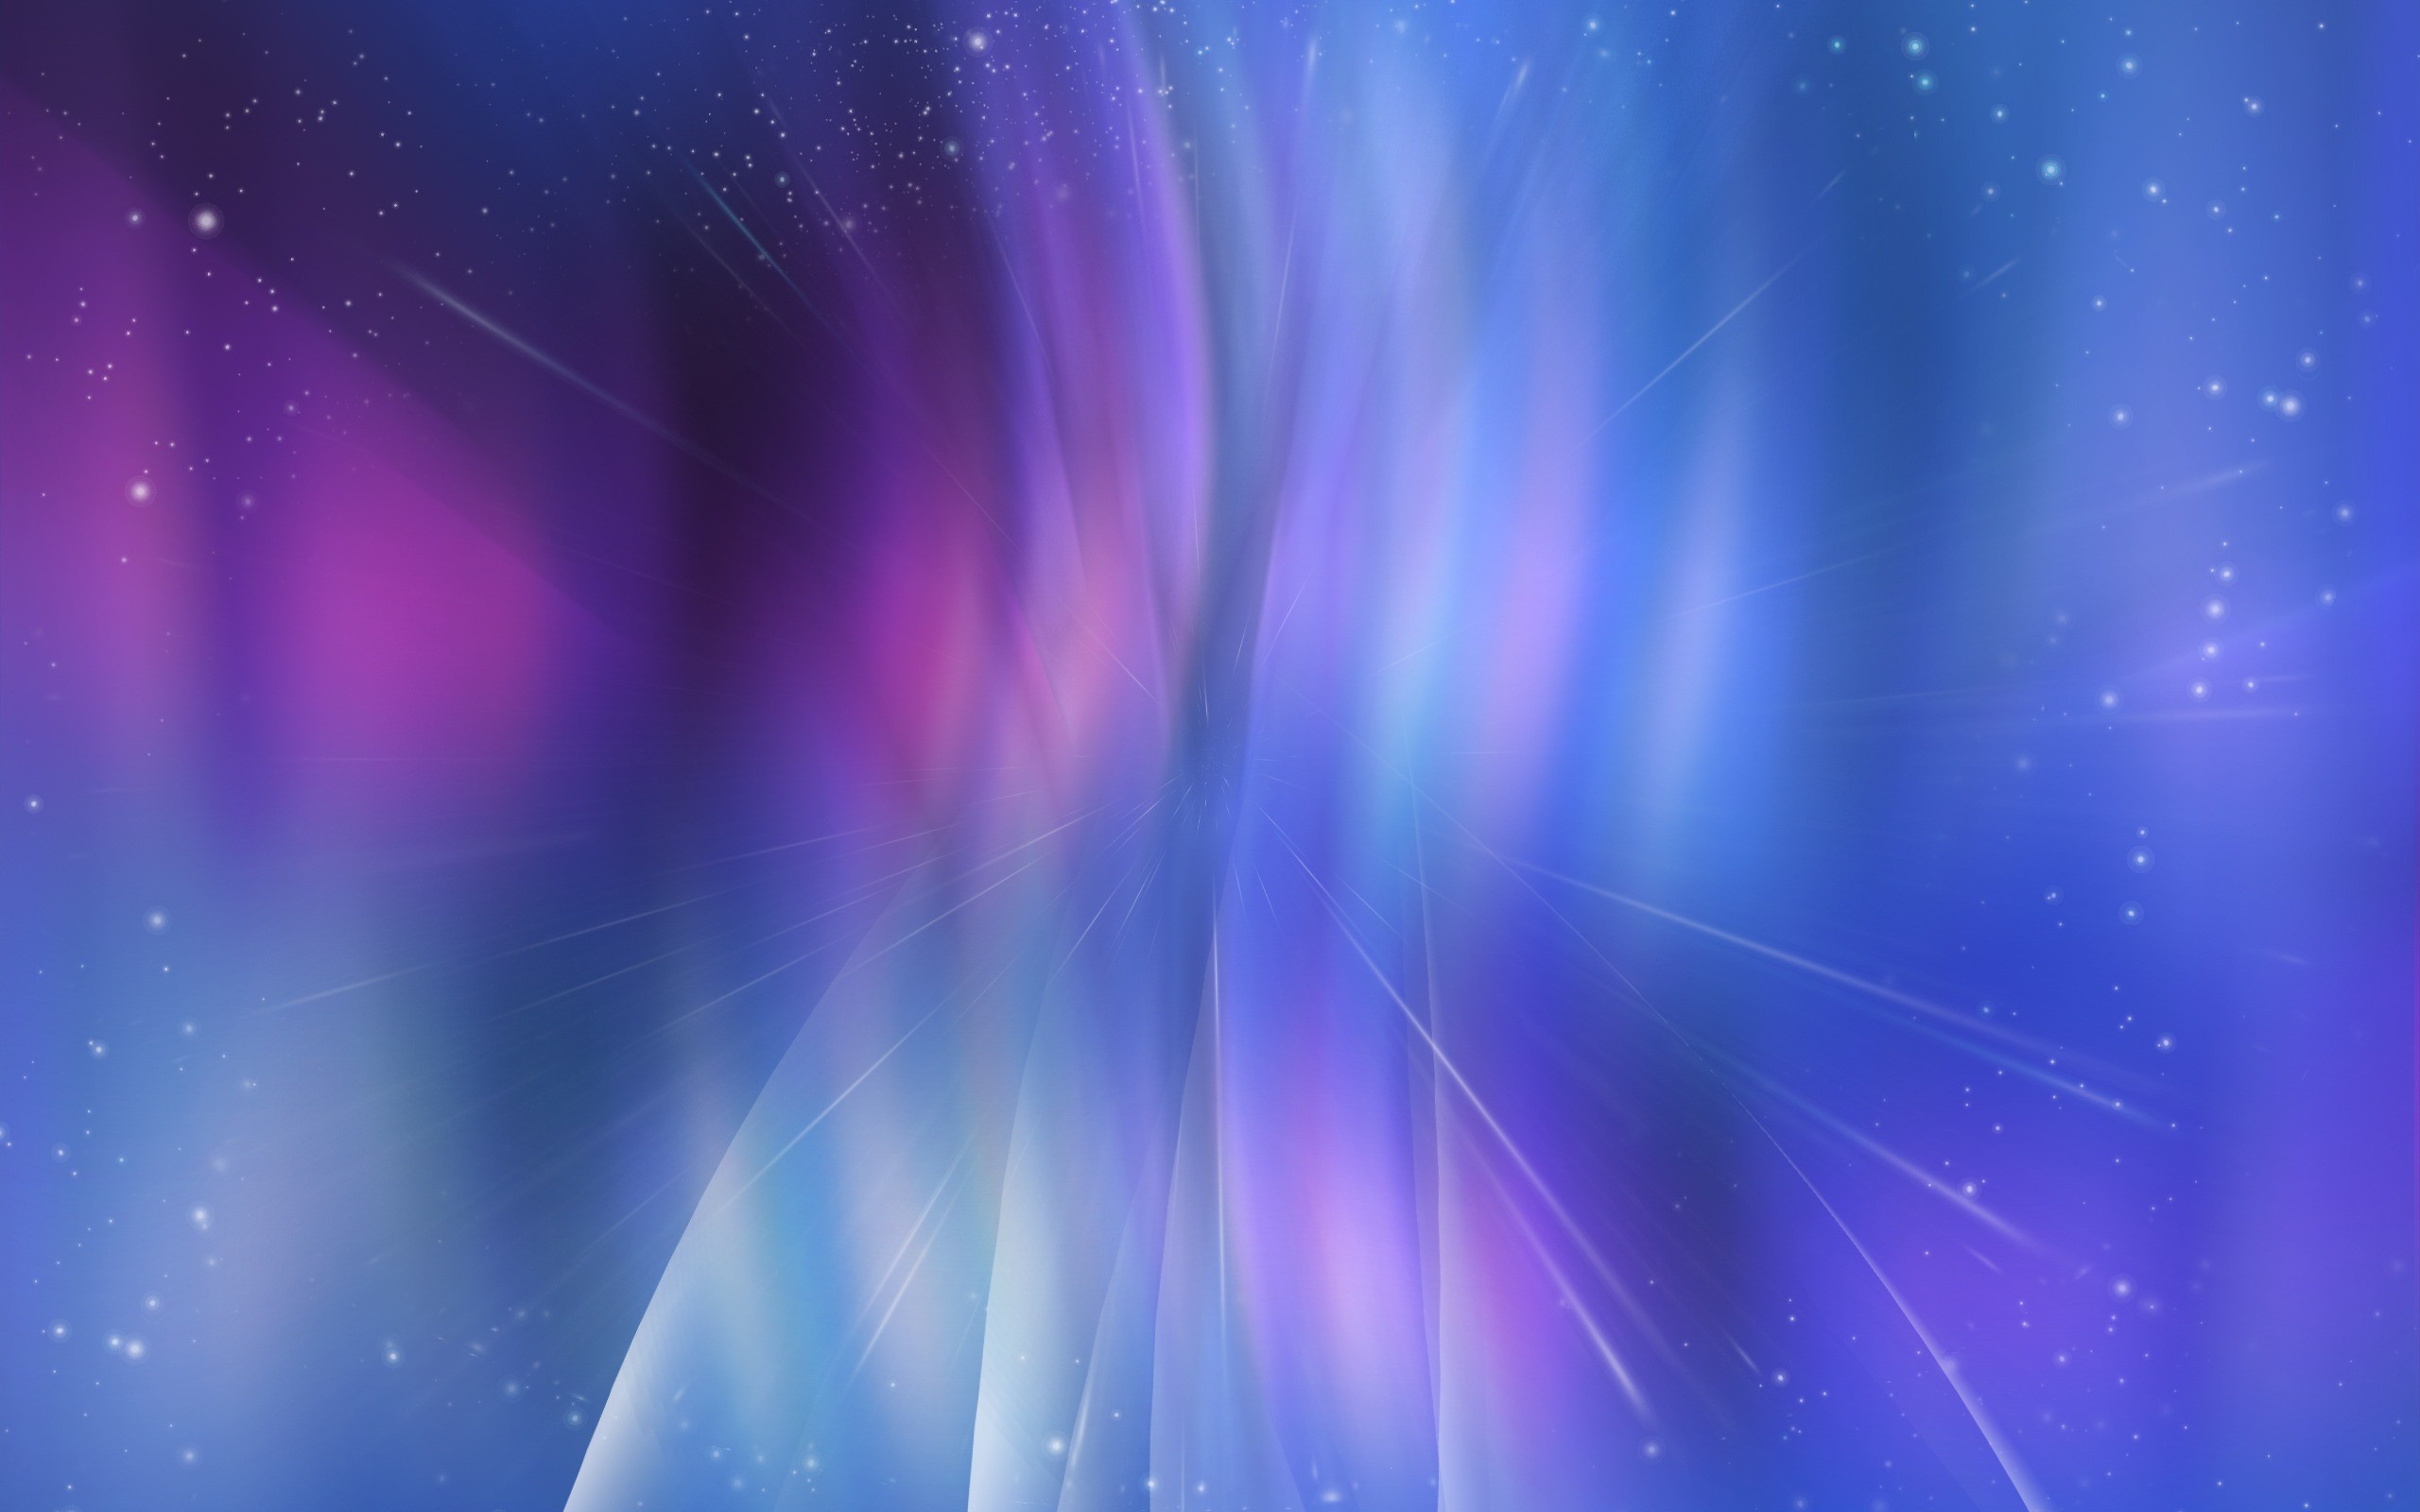 Abstract HD S 9996 Wallpapers – https://hdwallpapersf.com/abstract-